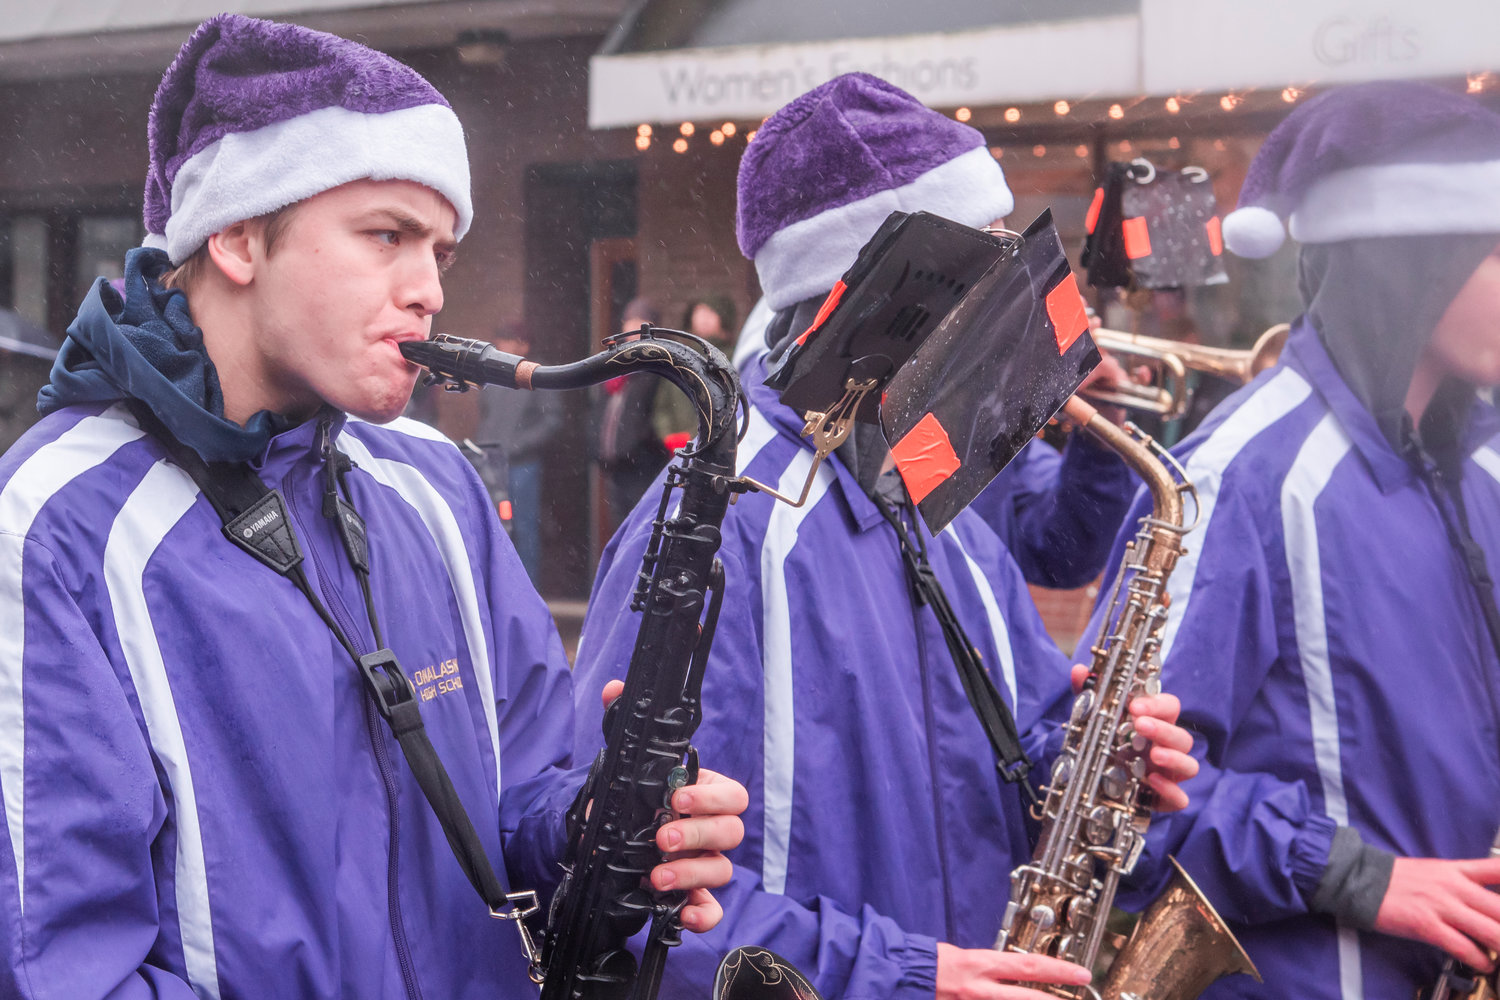 Onalaska High School band members play instruments while marching during the Santa Parade in downtown Chehalis on Saturday.